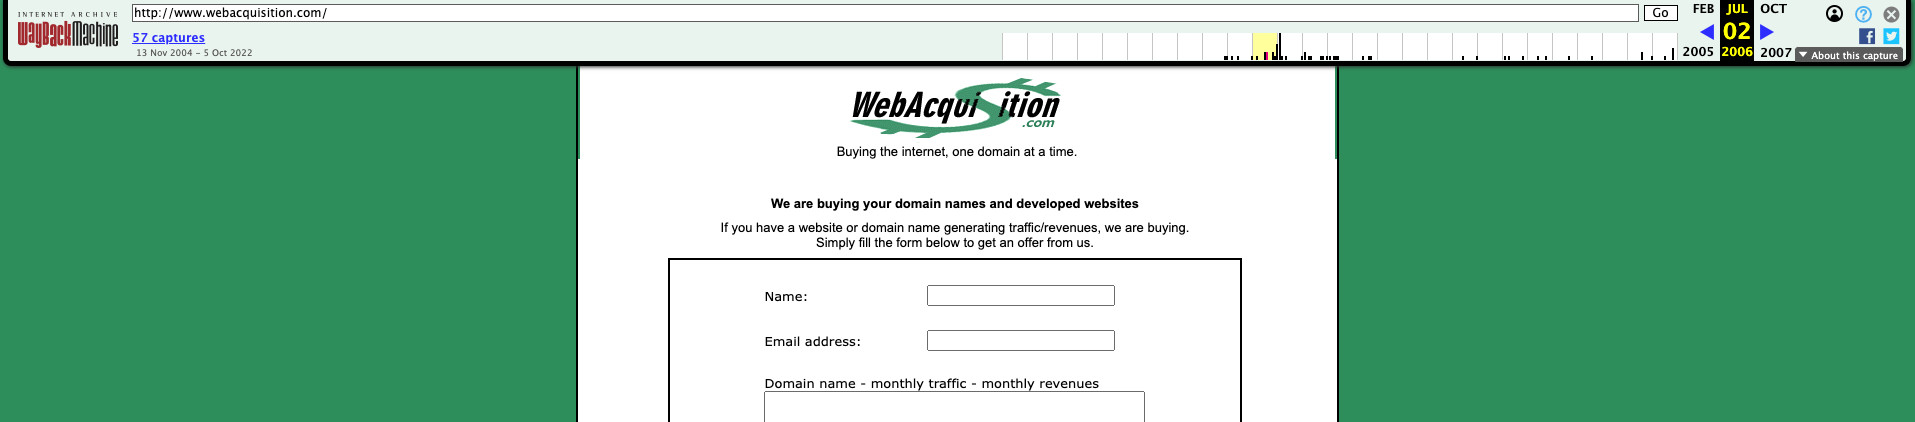 Archive.org showing the Web Acquisition website in 2006